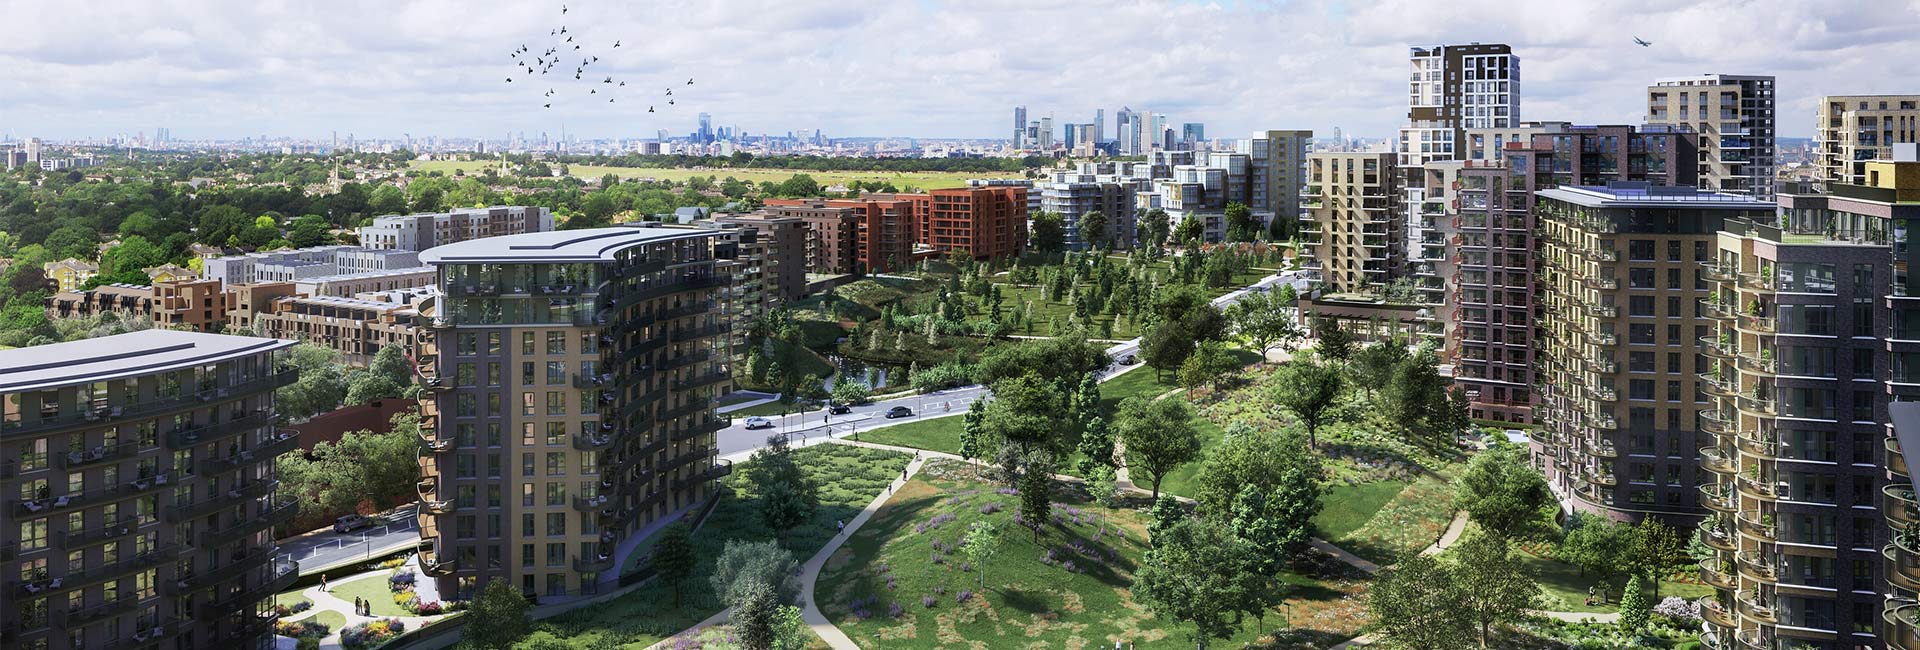 Kidbrooke Village is located within one of London’s most sought-after locations, the Royal Borough of Greenwich.